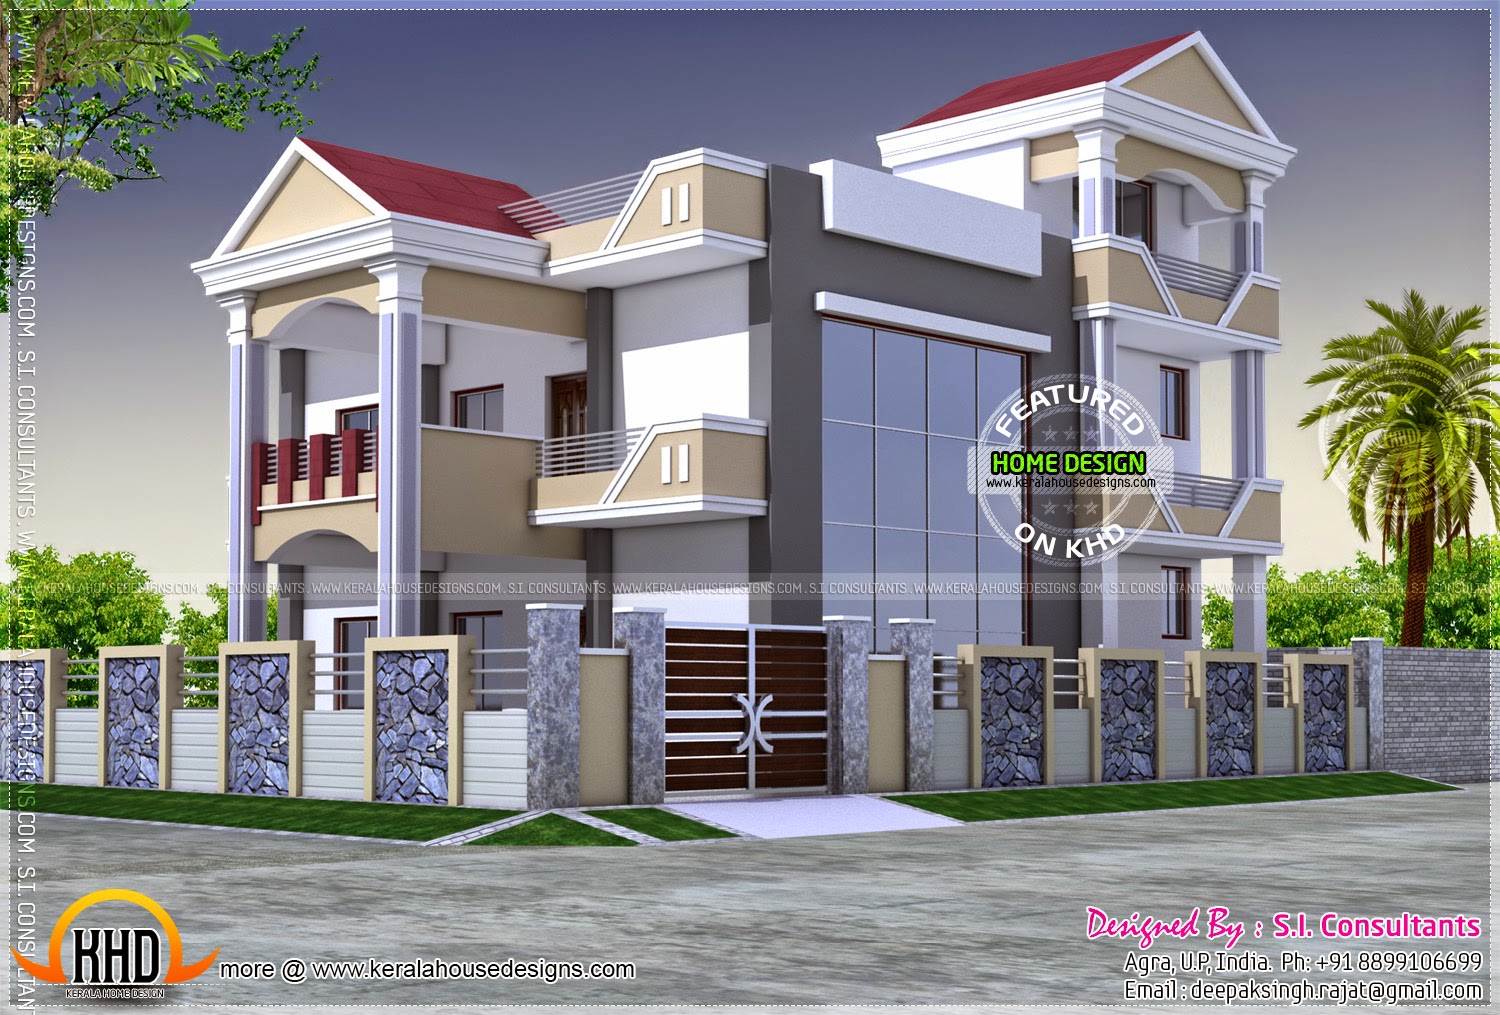  3D  view  and floor plan  Home  Kerala Plans 